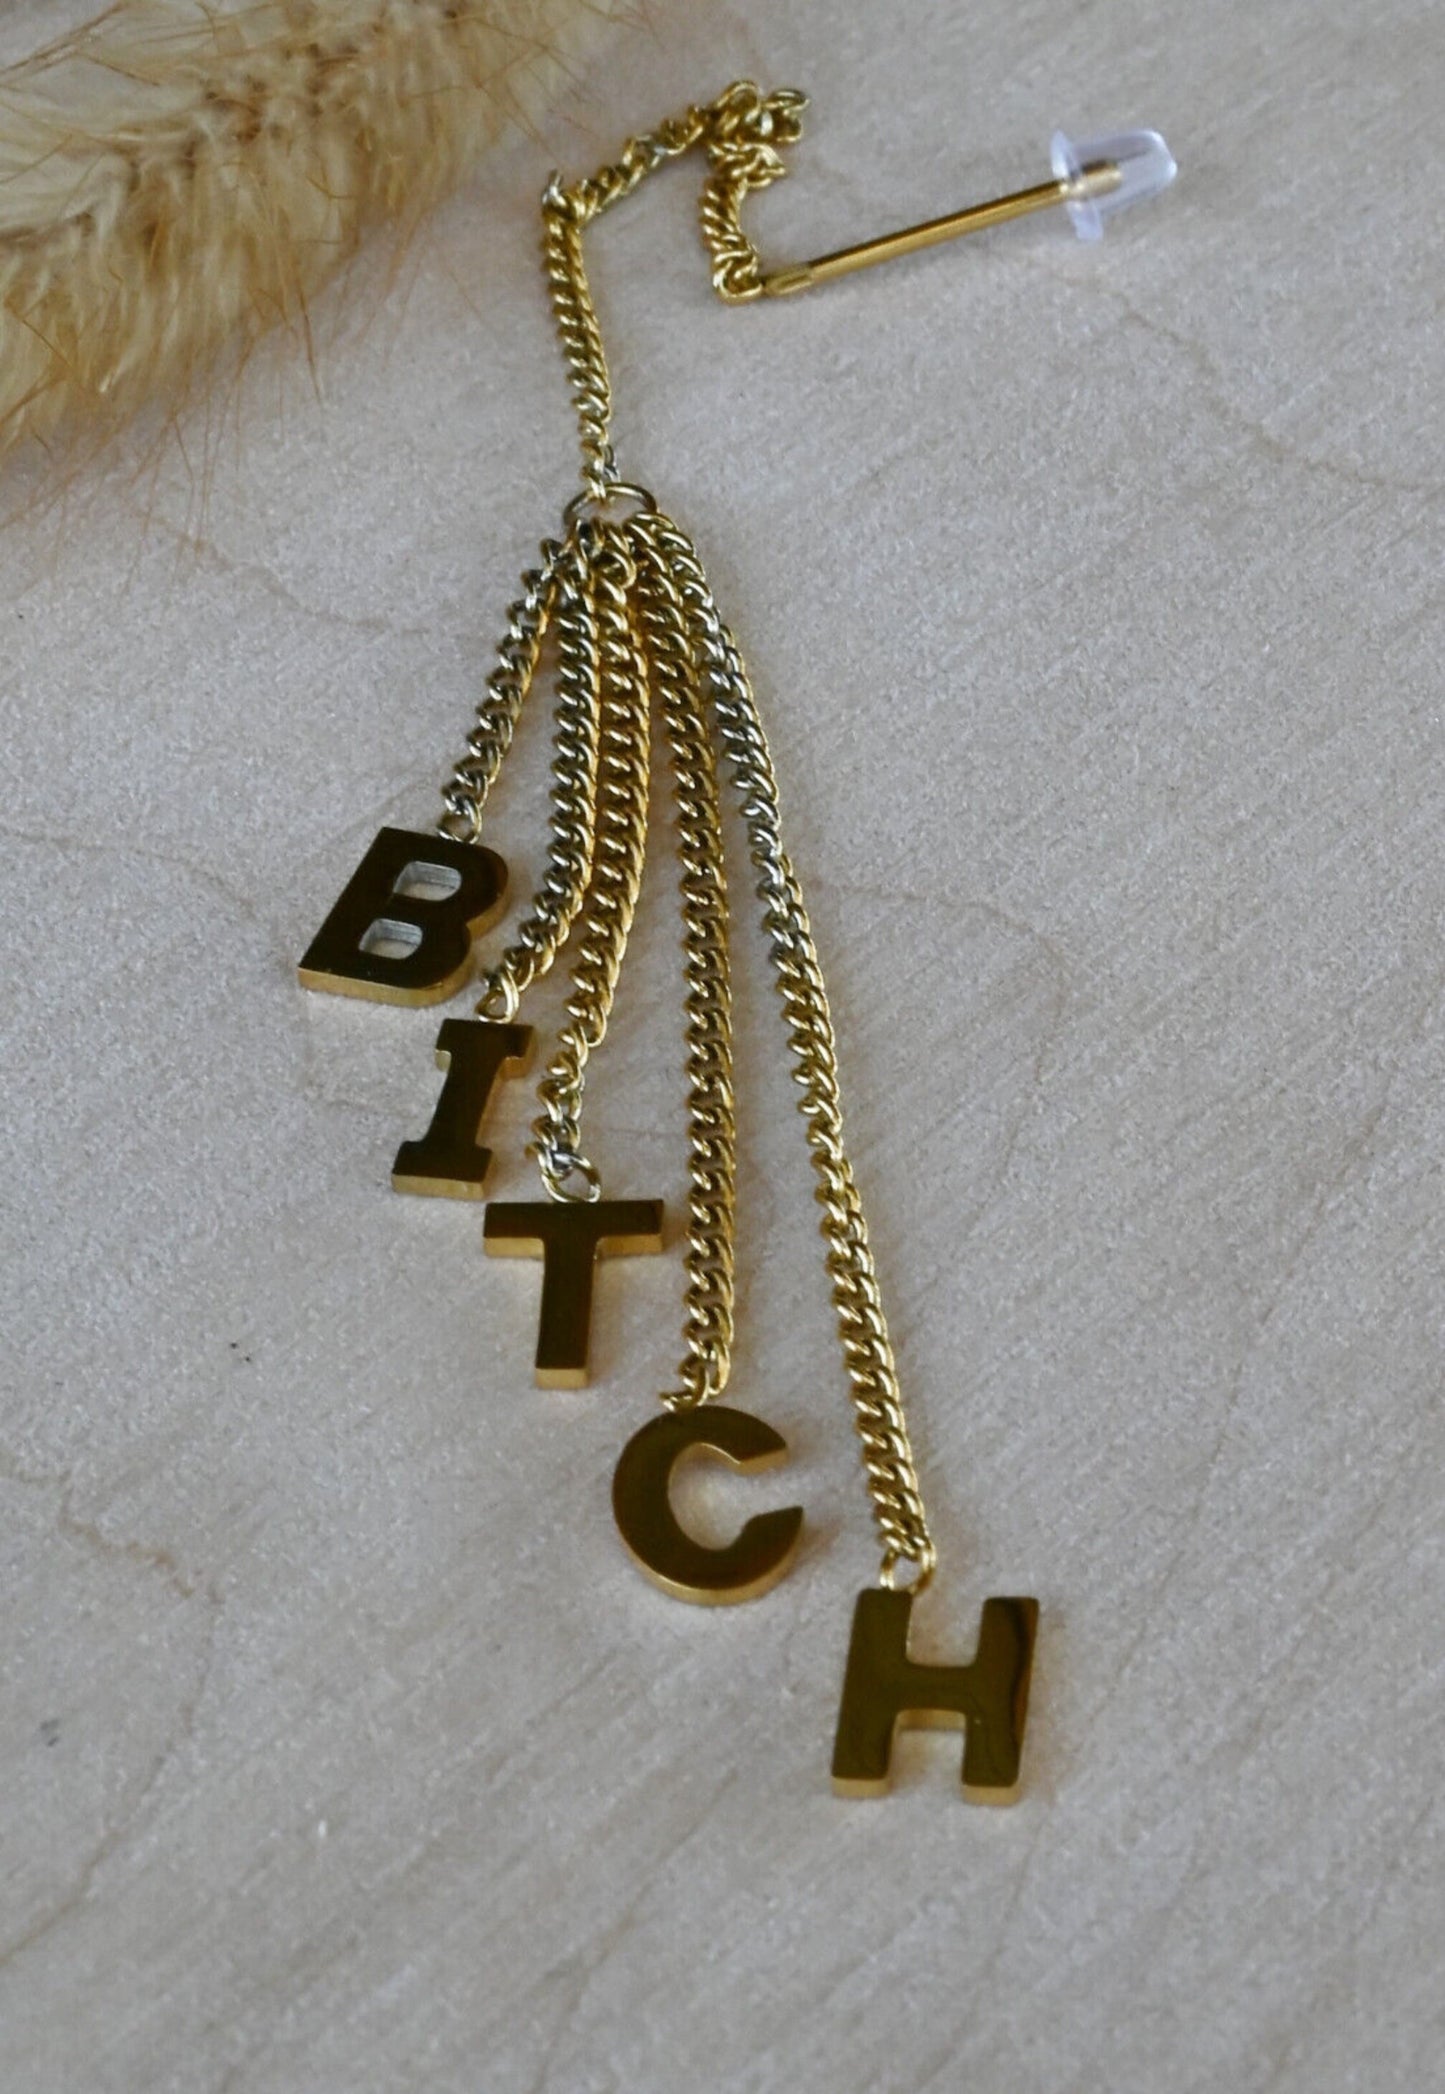 Pair of Unique "Bitch" Chain Threader Earrings Free Falling 316L Stainless Steel Stud Earrings- 20g - Gold, Rose Gold and Silver Available!